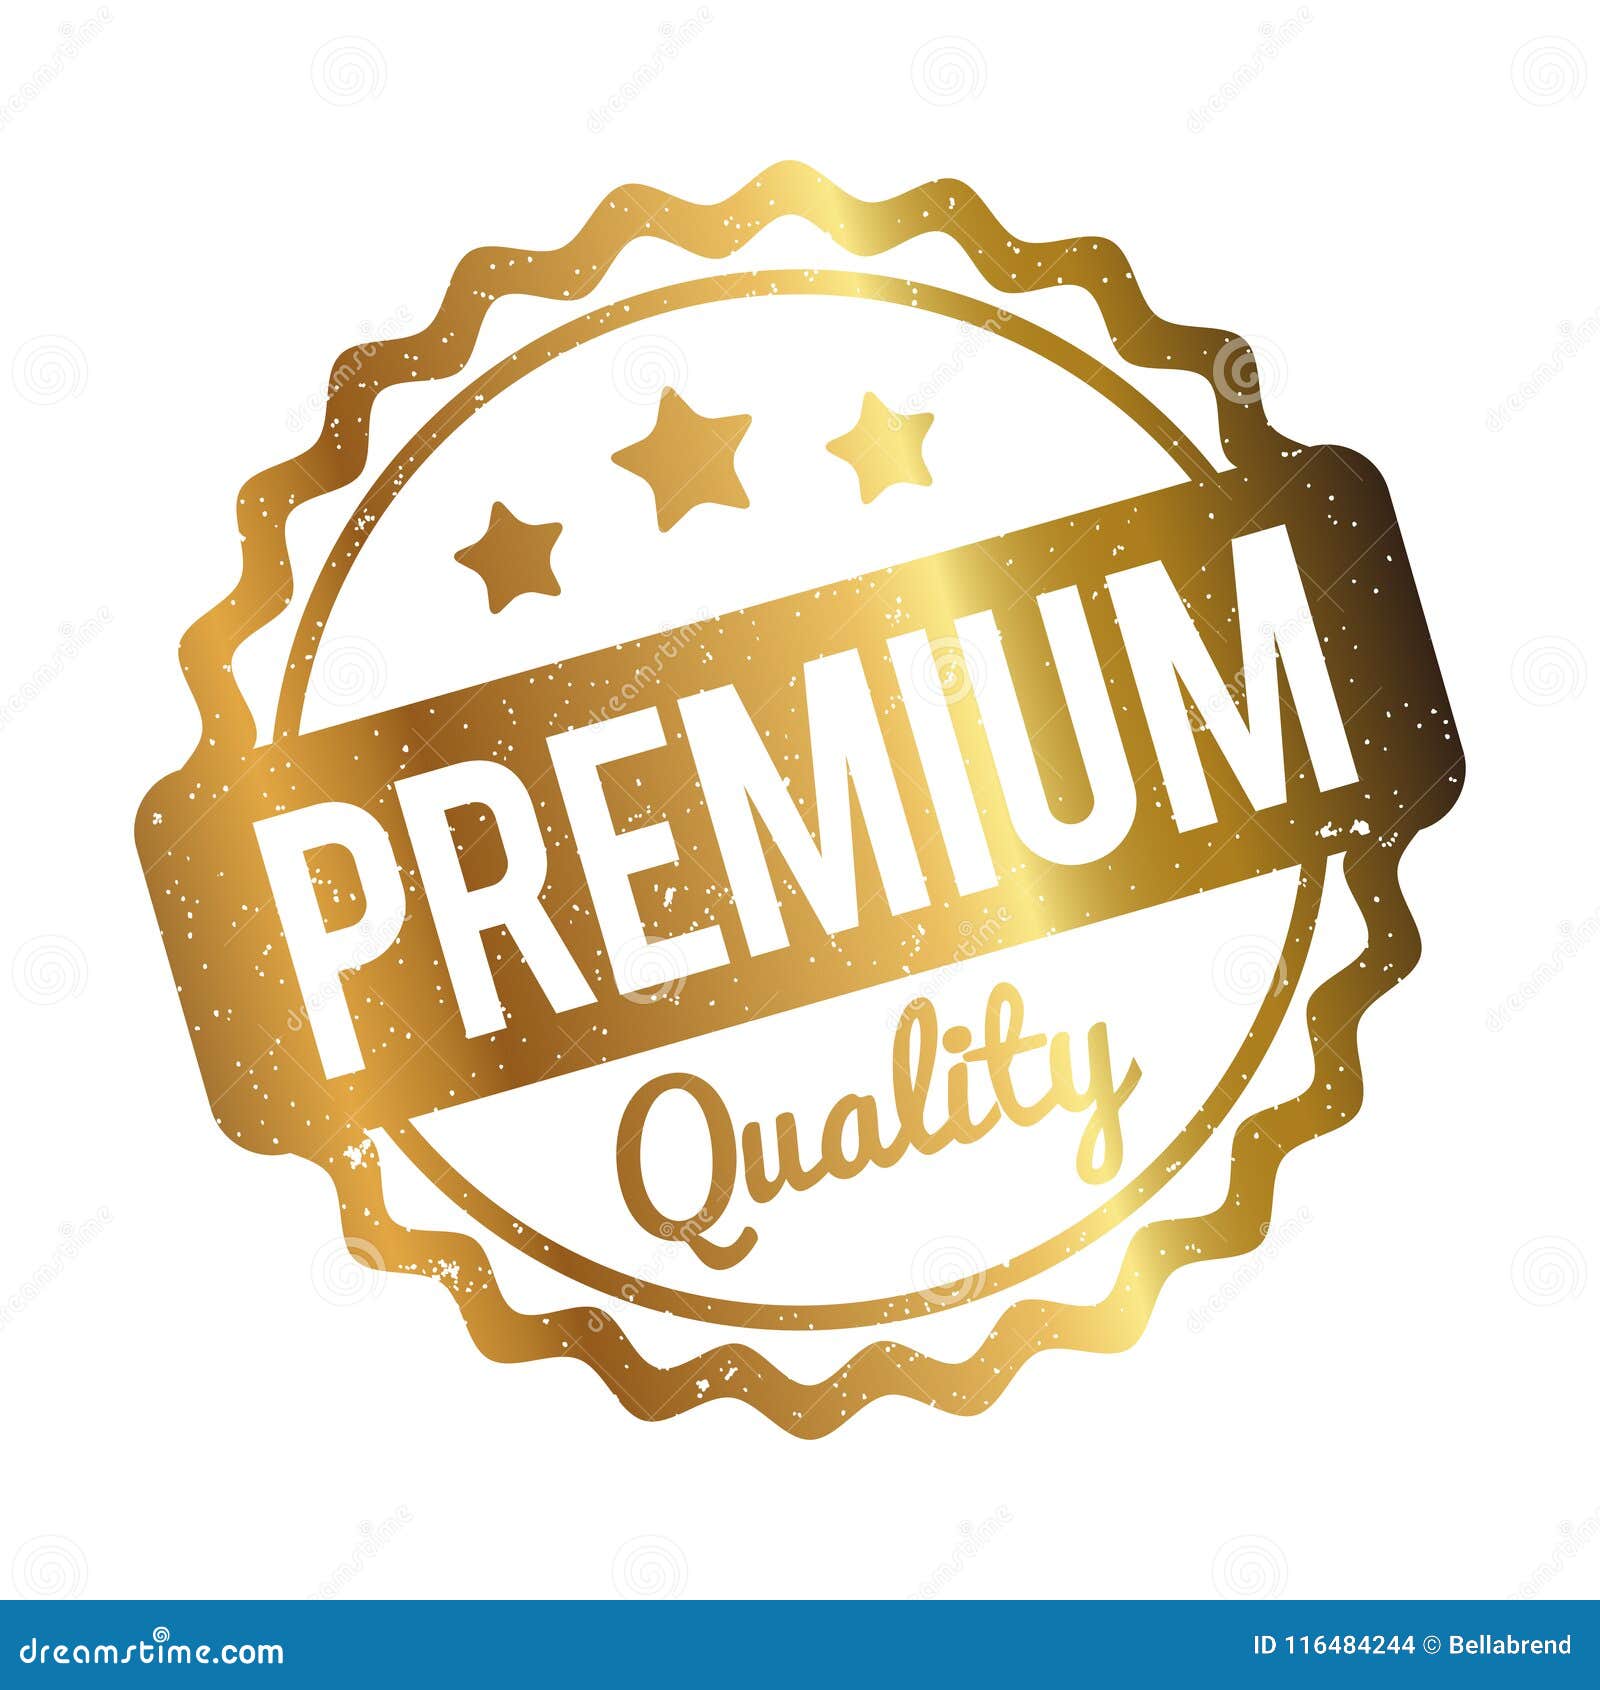 premium quality rubber stamp gold on a white background